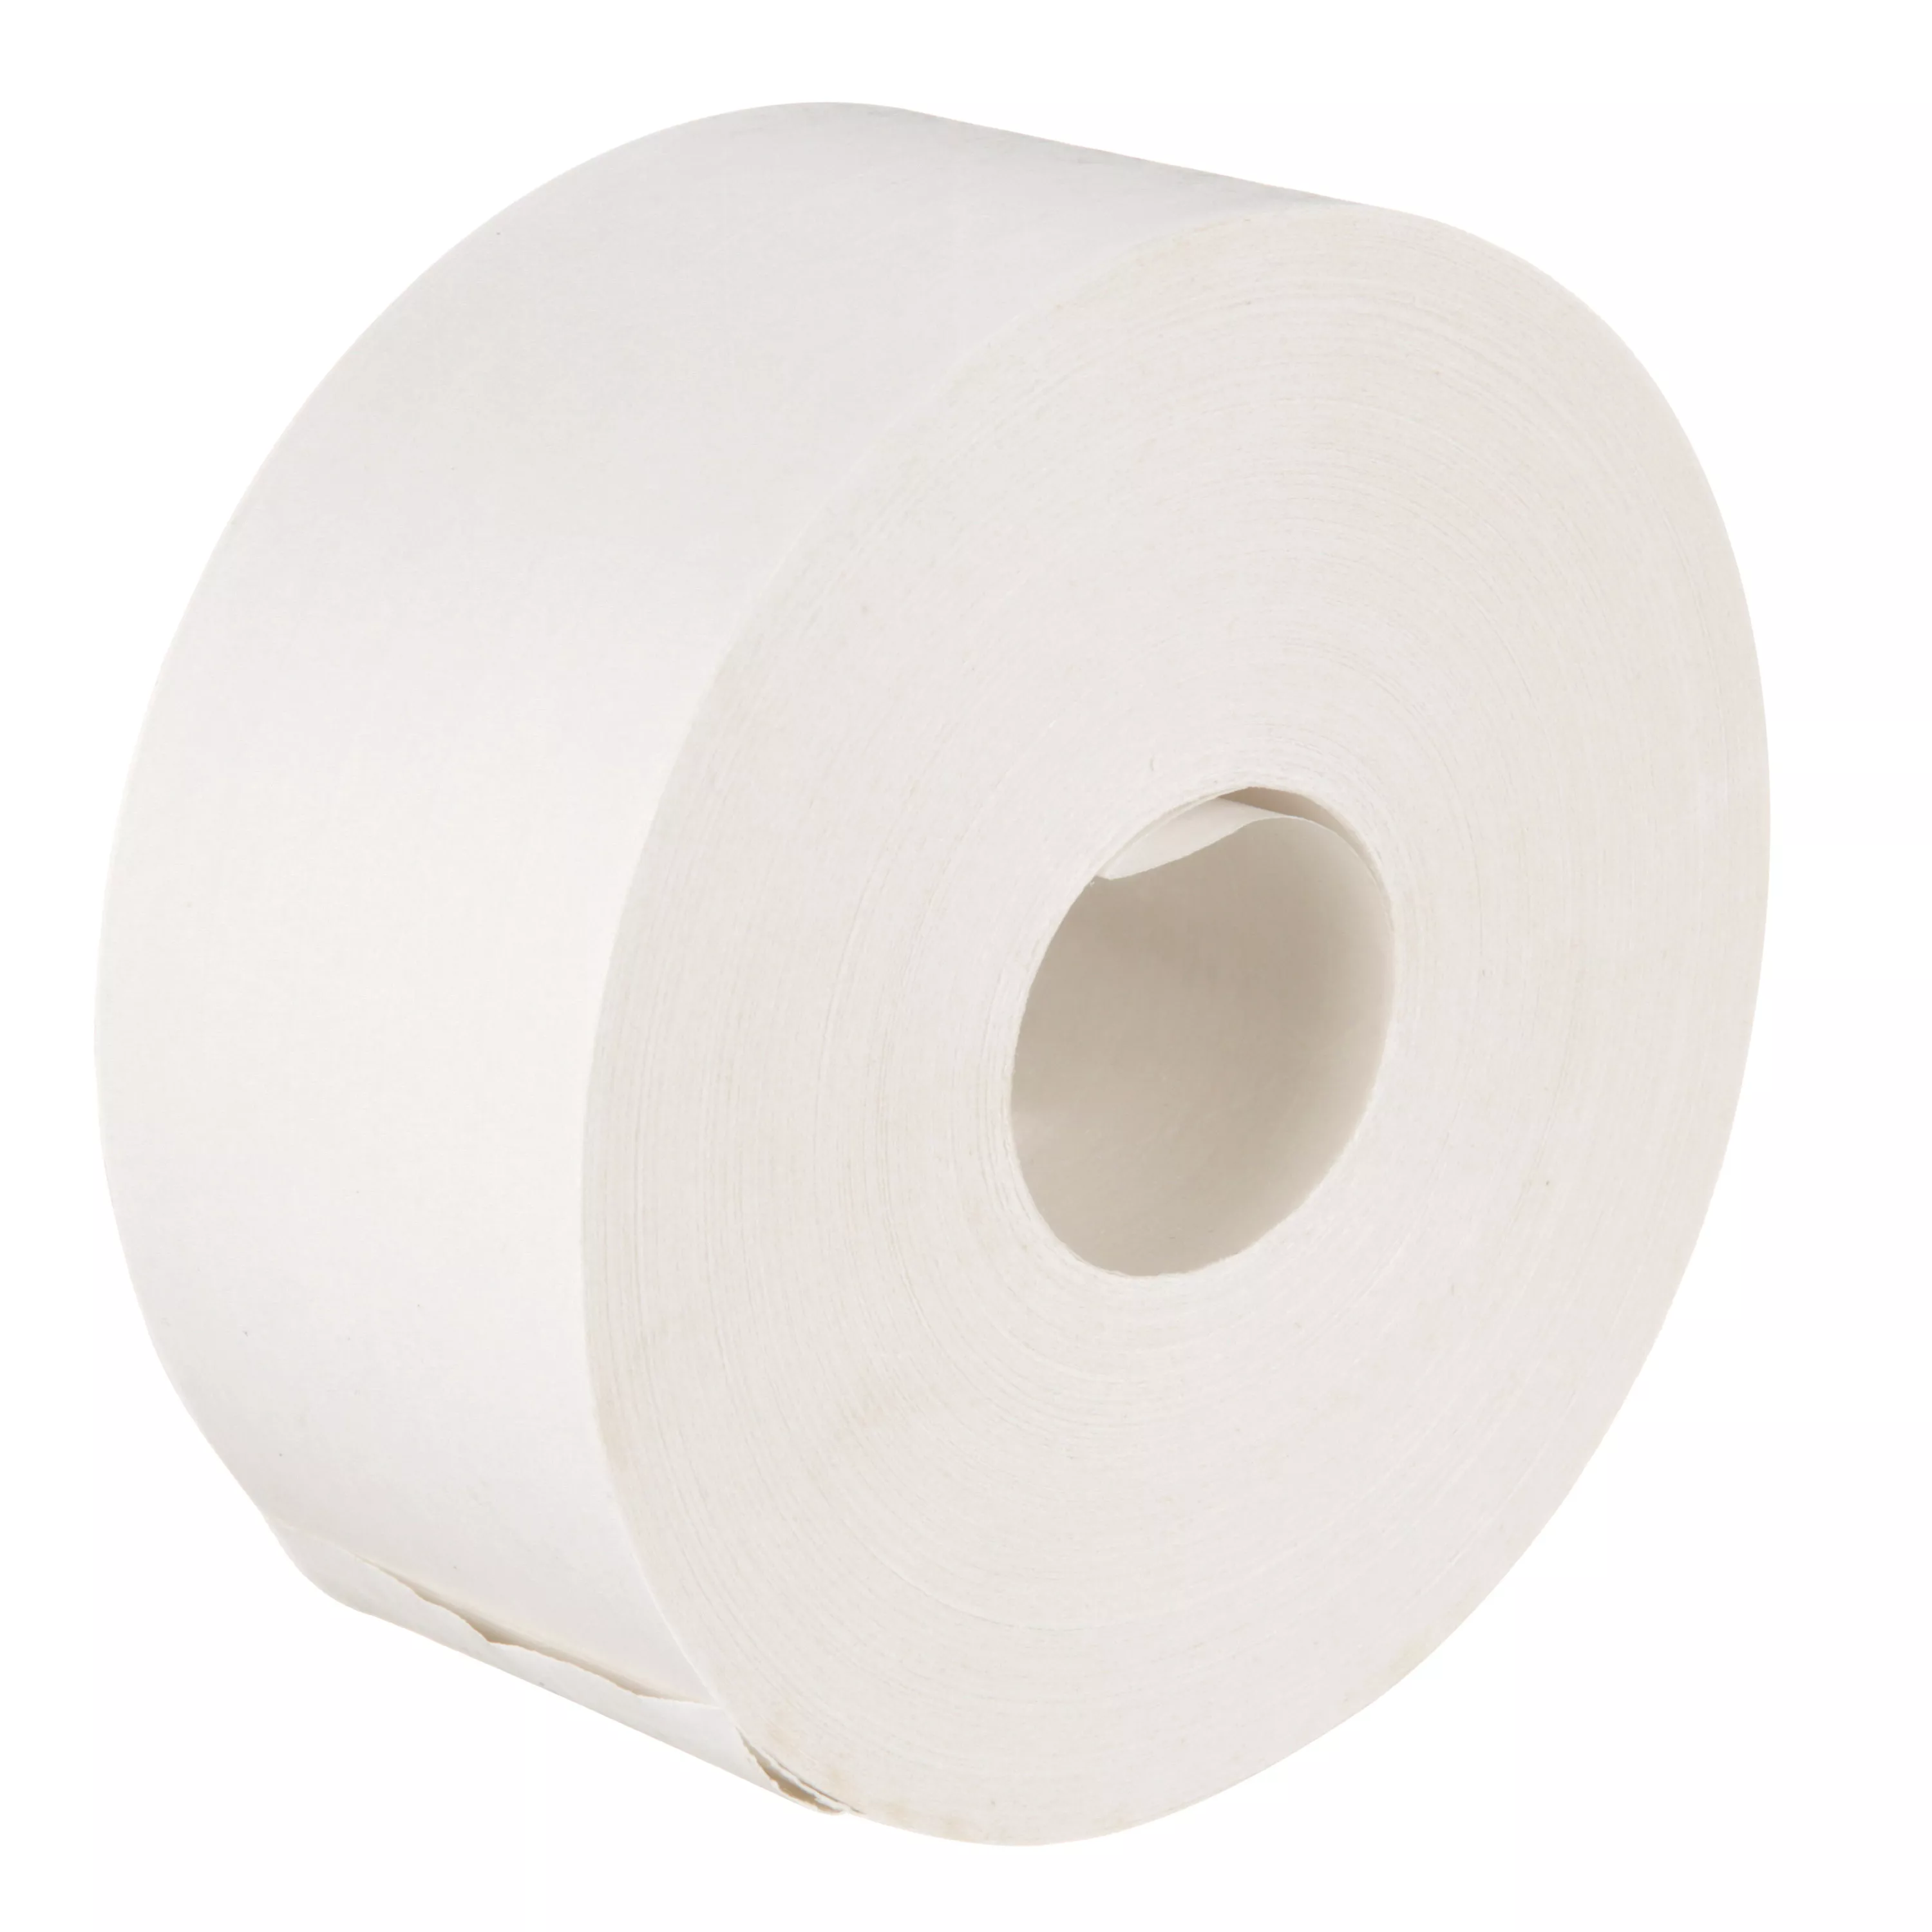 SKU 7000124807 | 3M™ Water Activated Paper Tape 6145